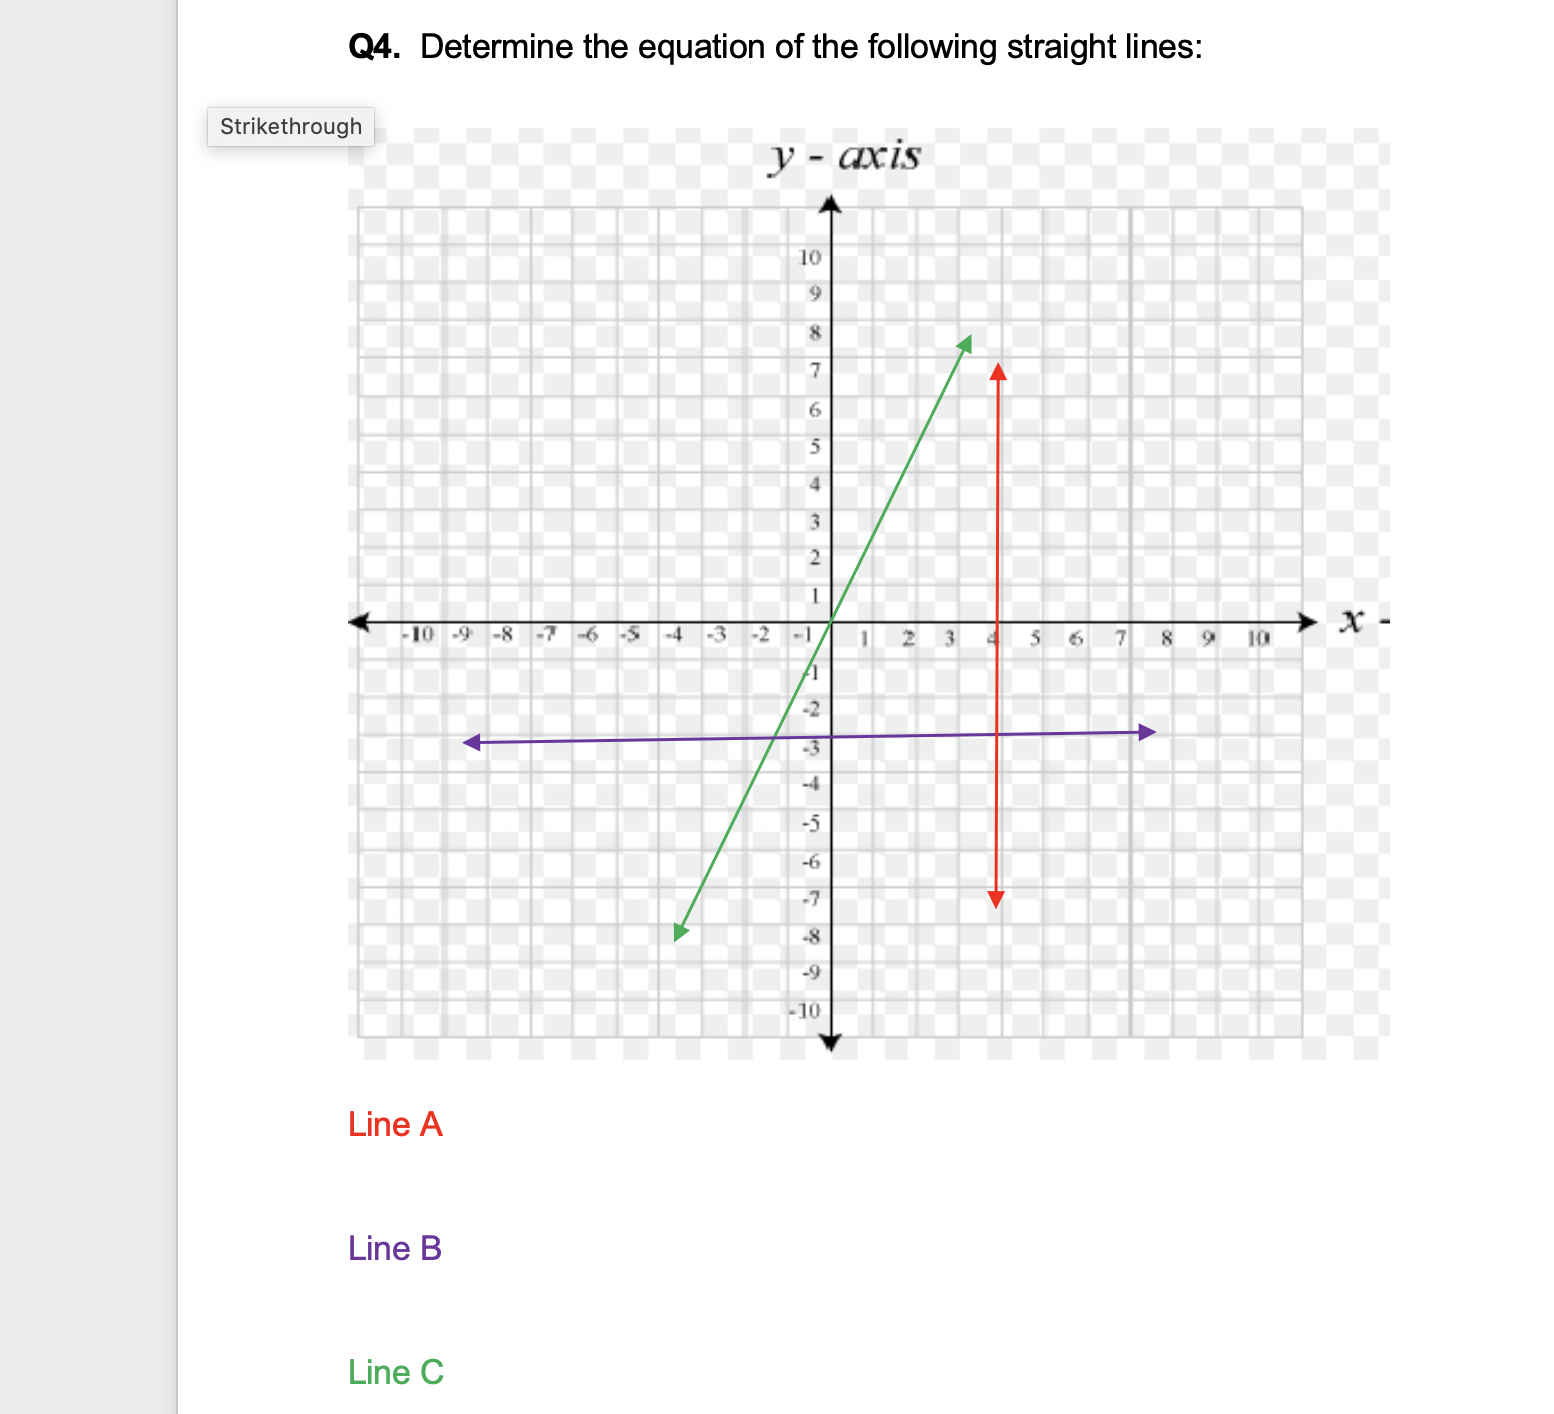 Determine the equation of the following straight lines:
